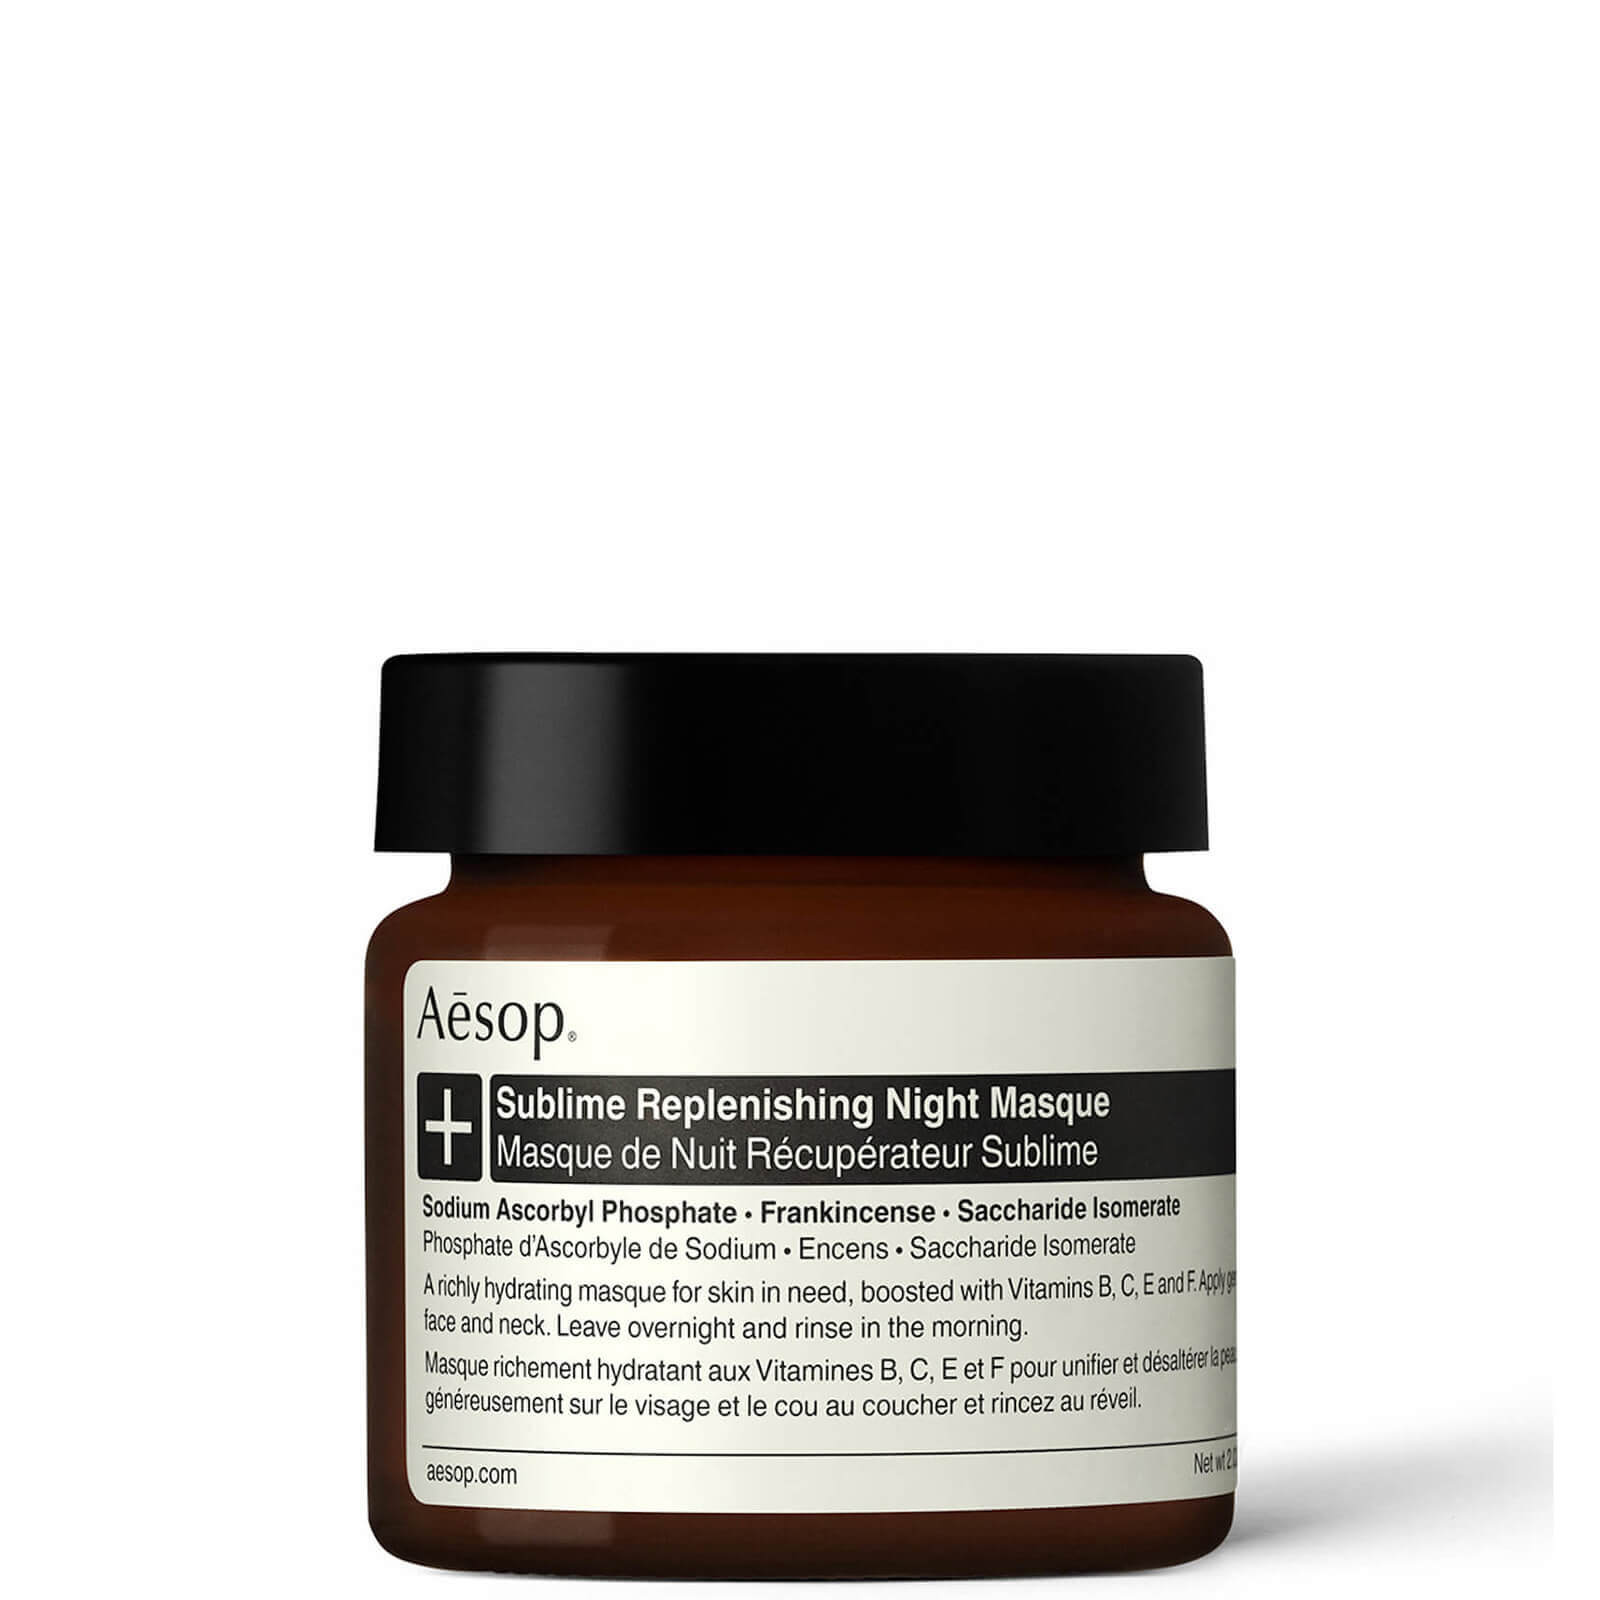 Aesop Sublime Replenishing Night Masque In Lime